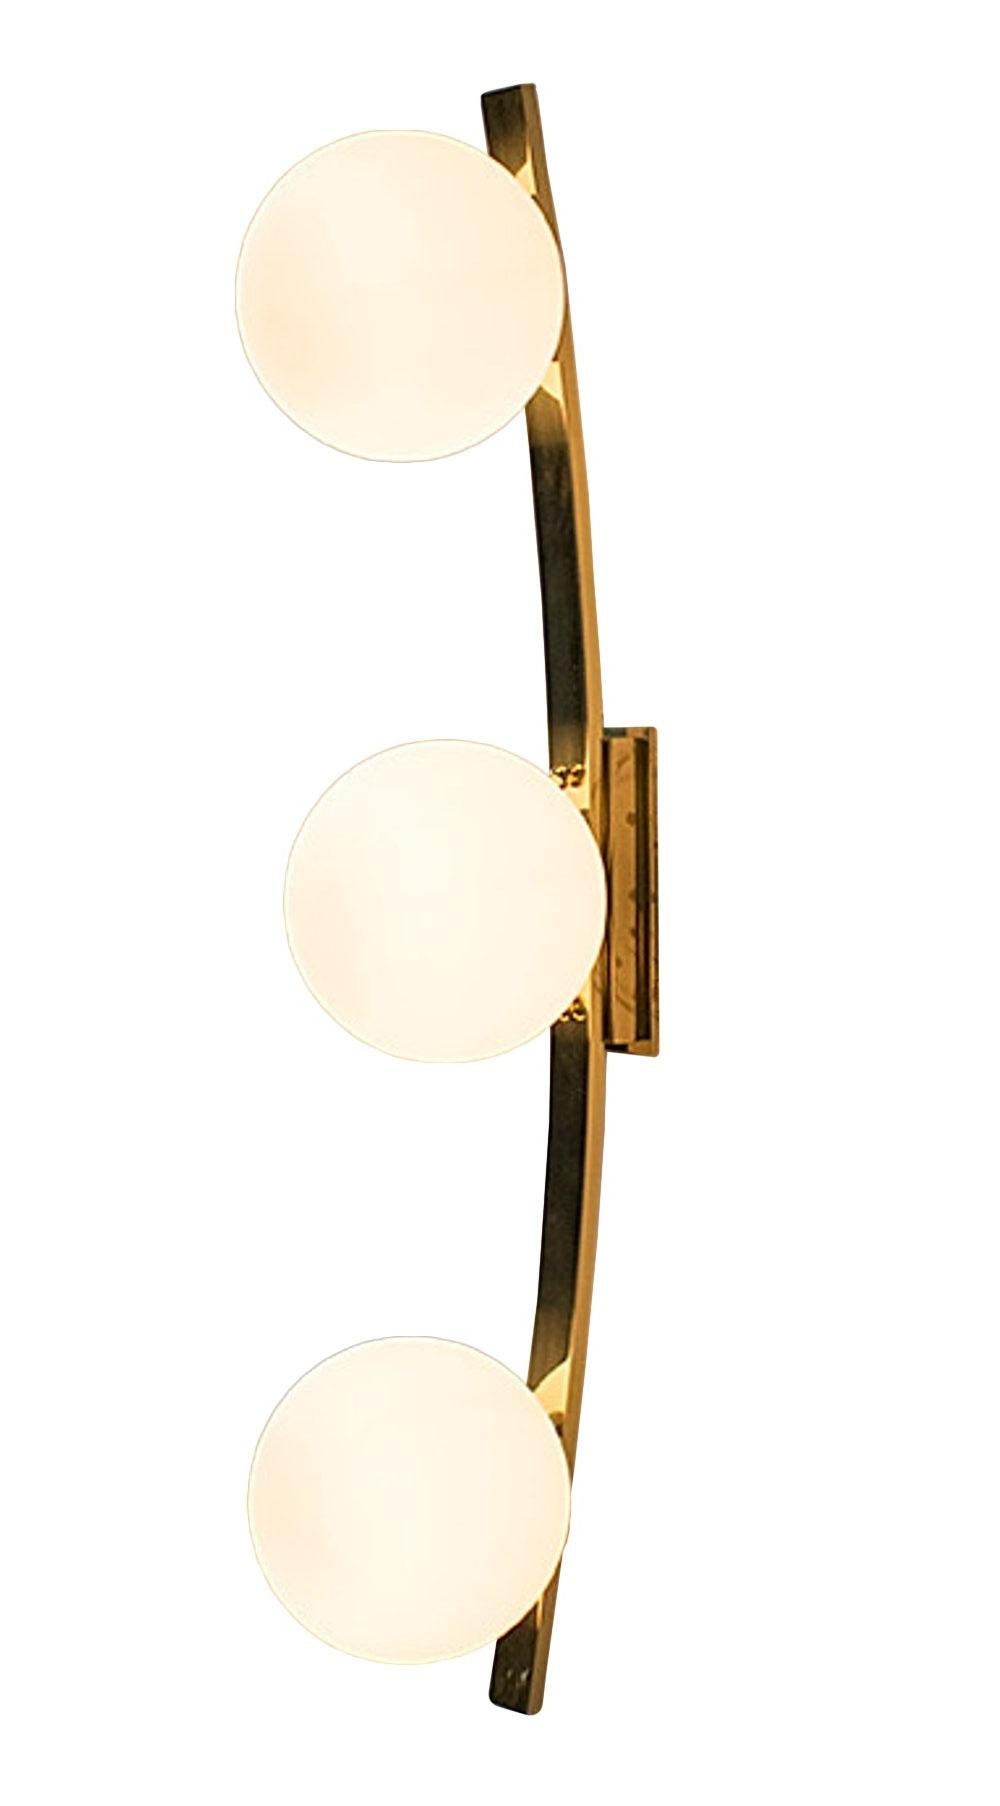 Italian wall light with hand blown matte white Murano glass globes, mounted on curved polished brass finish frame / Designed by Fabio Bergomi / Made in Italy
3 lights / E12 or E14 / max 40 W each
Measures: Height 31.5 inches / Width 6 inches / Depth